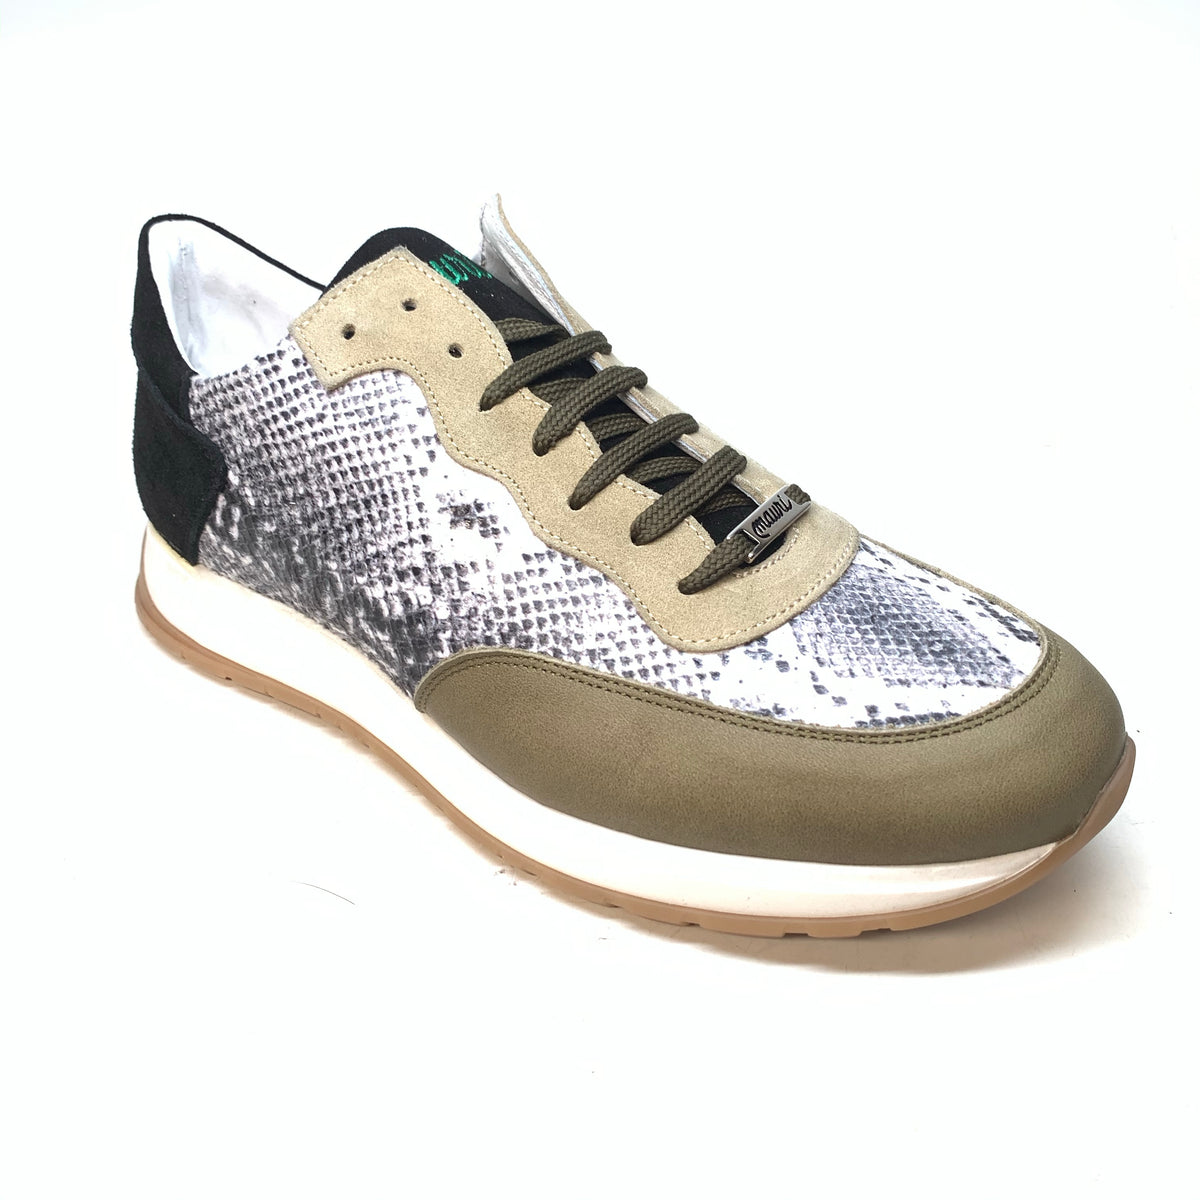 Mauri M728 Calf, Python Print, & Green Suede Sneakers - Dudes Boutique